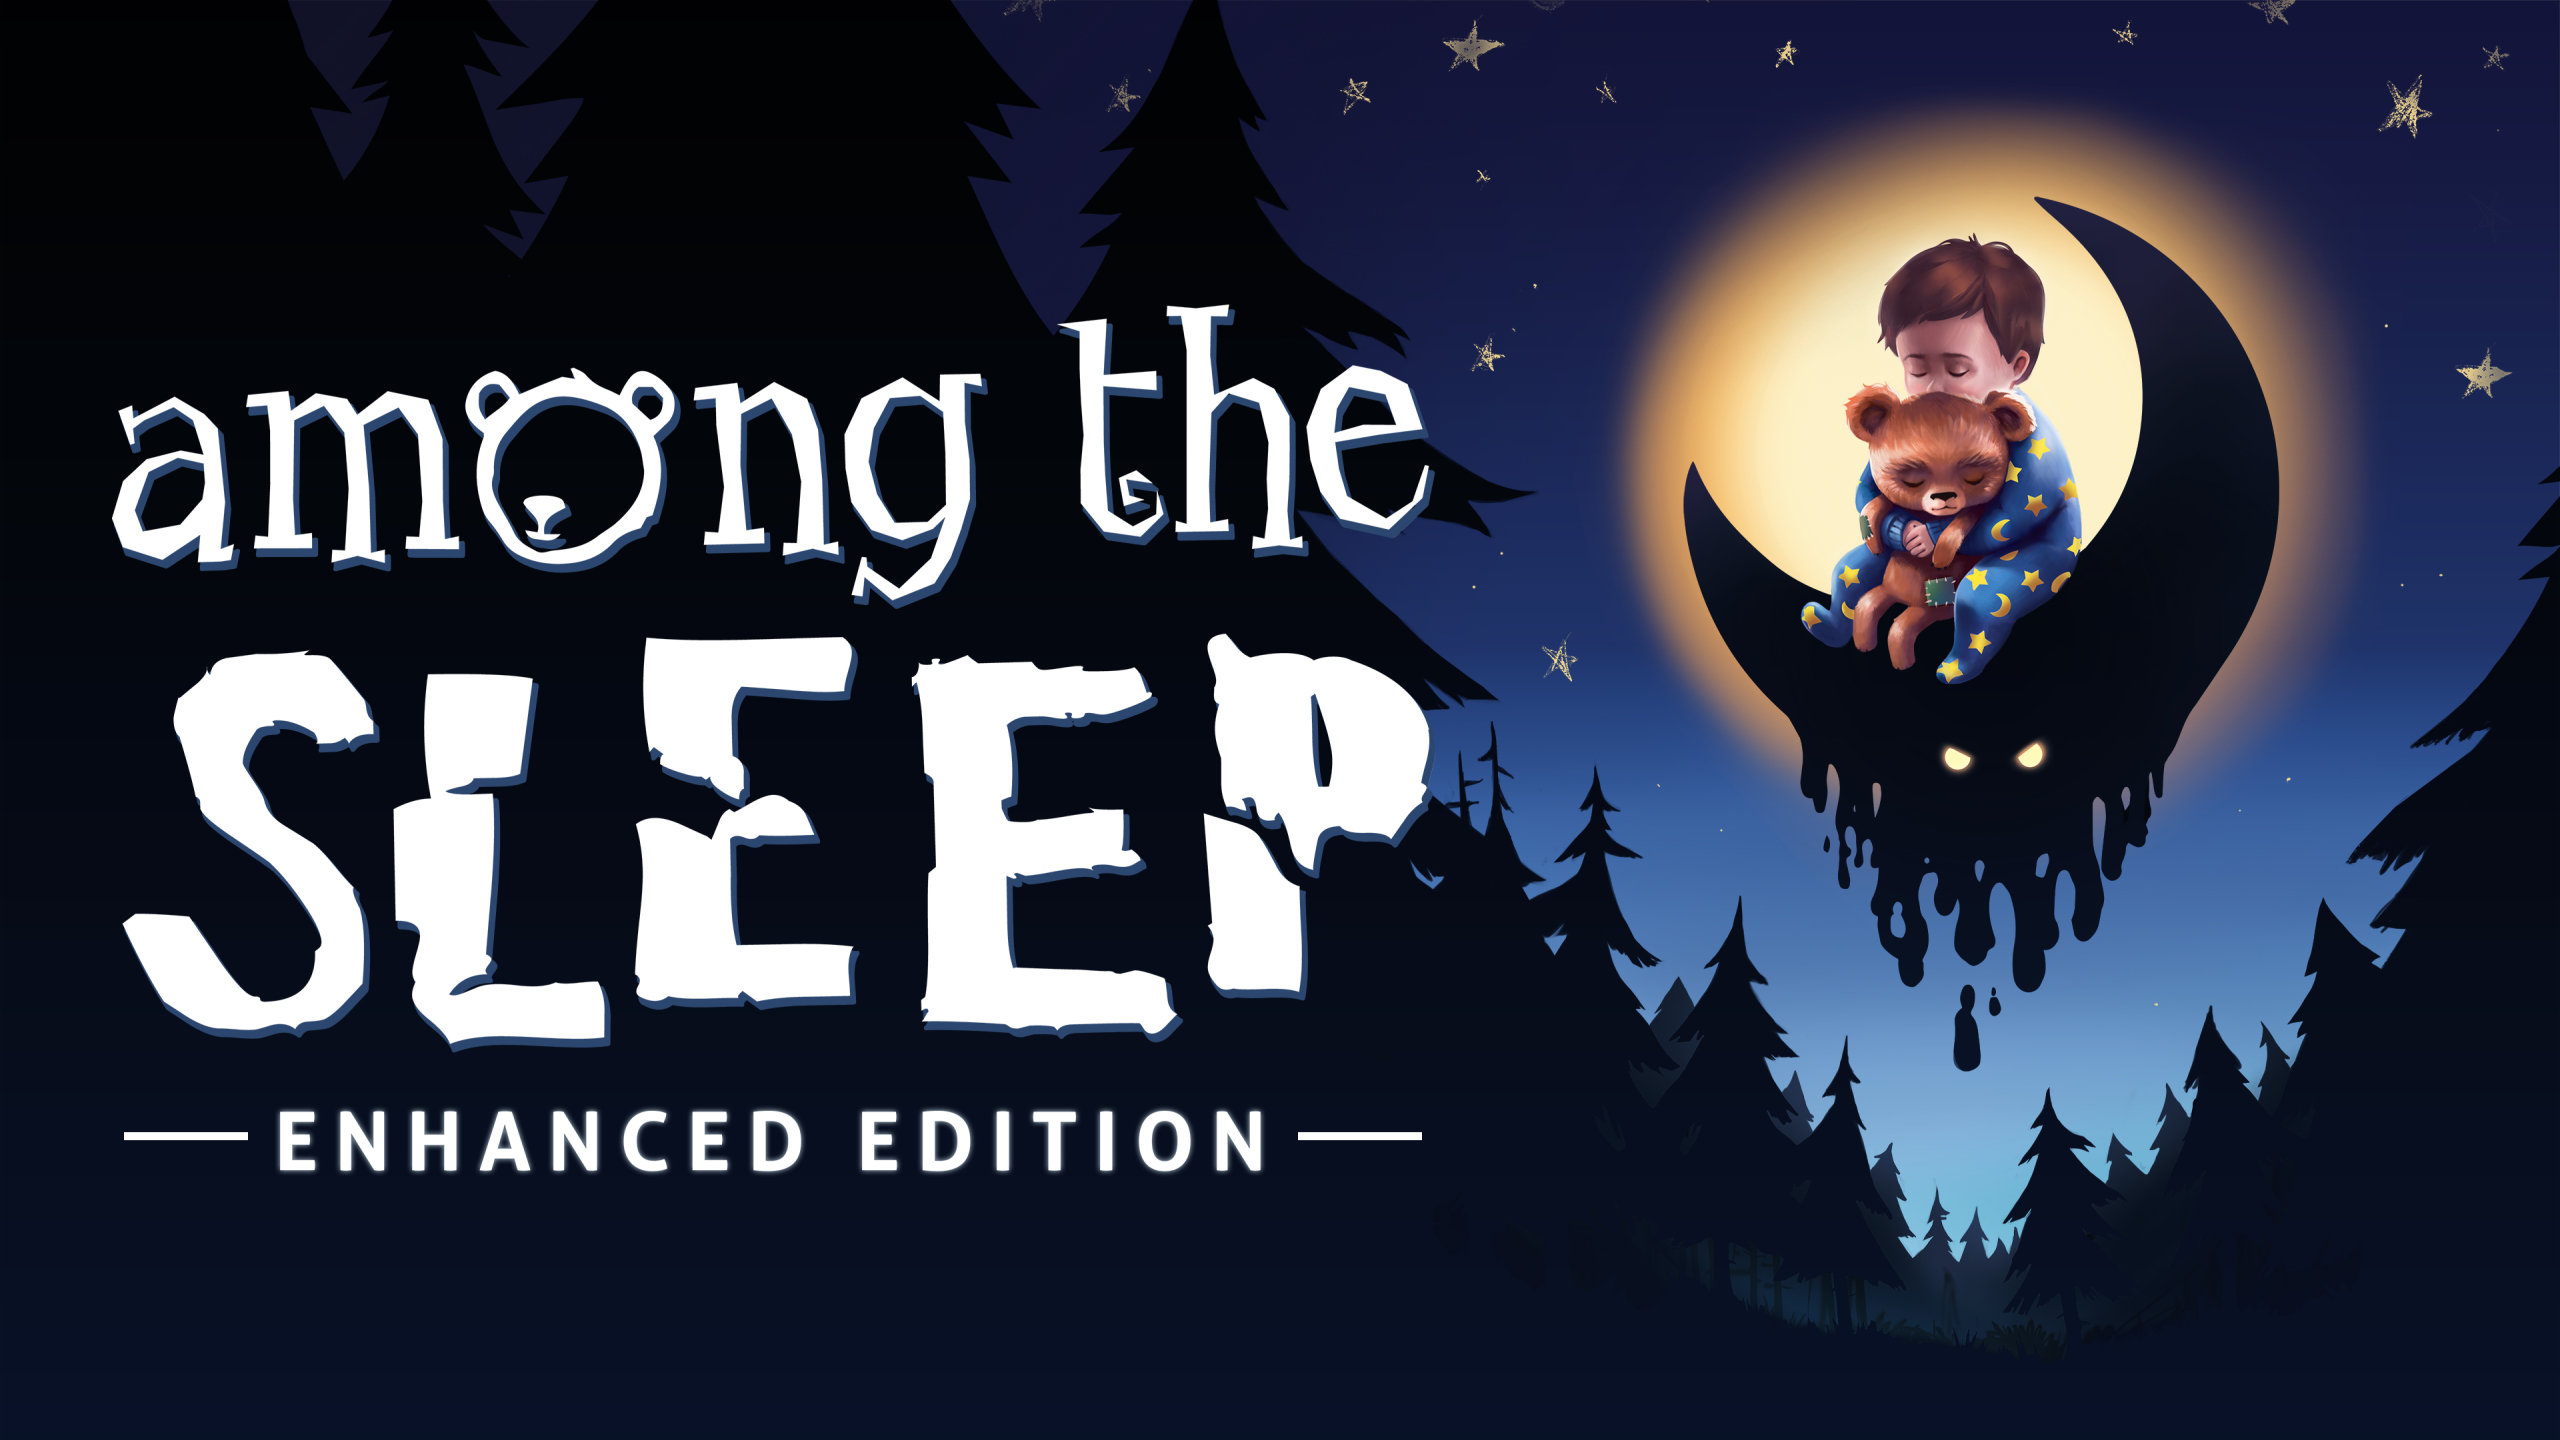 Among The Sleep PC Game Latest Version Free Download